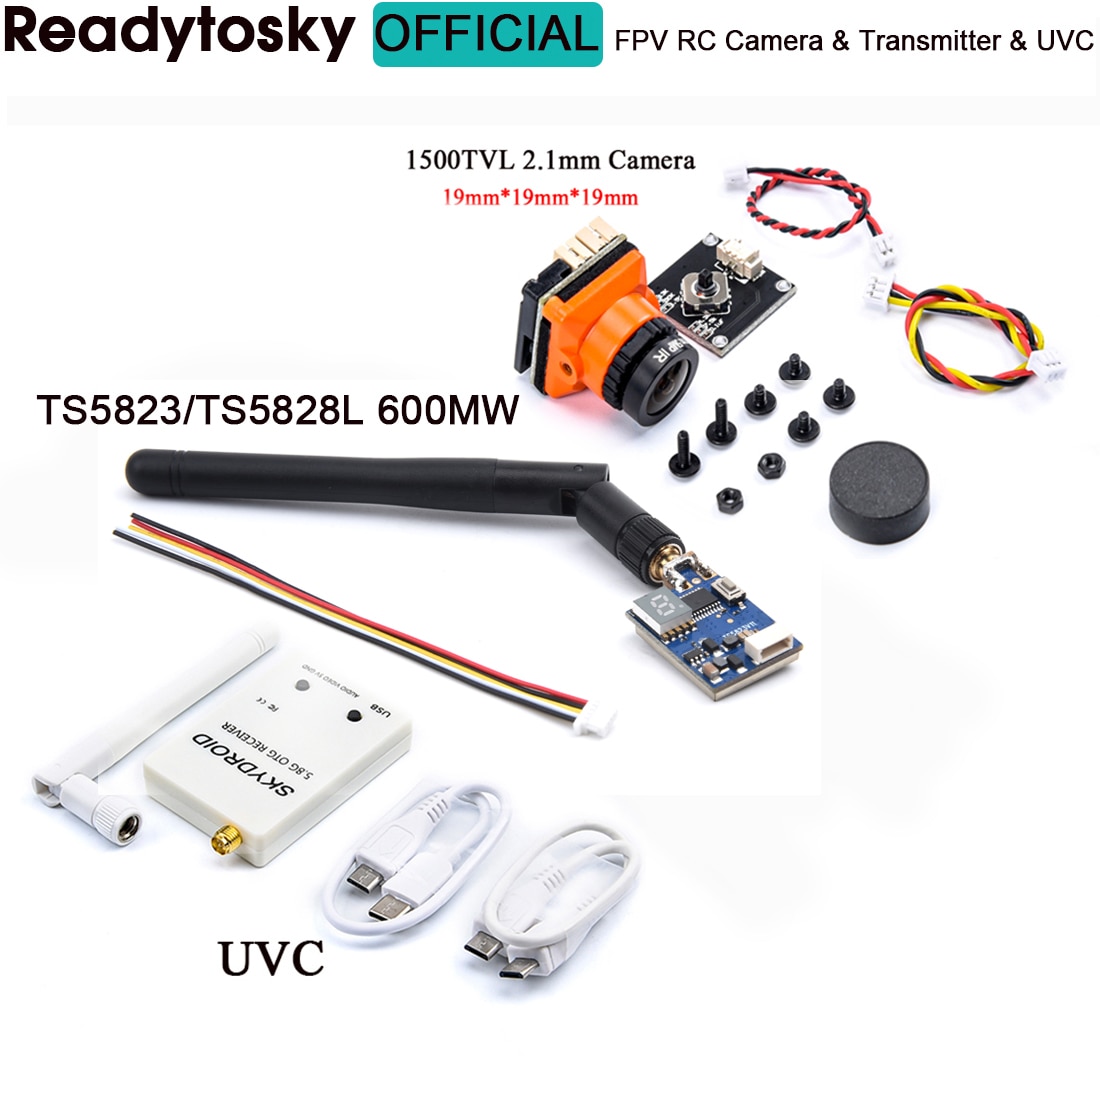 FPV Transmitter & Camera Receiver for Drone